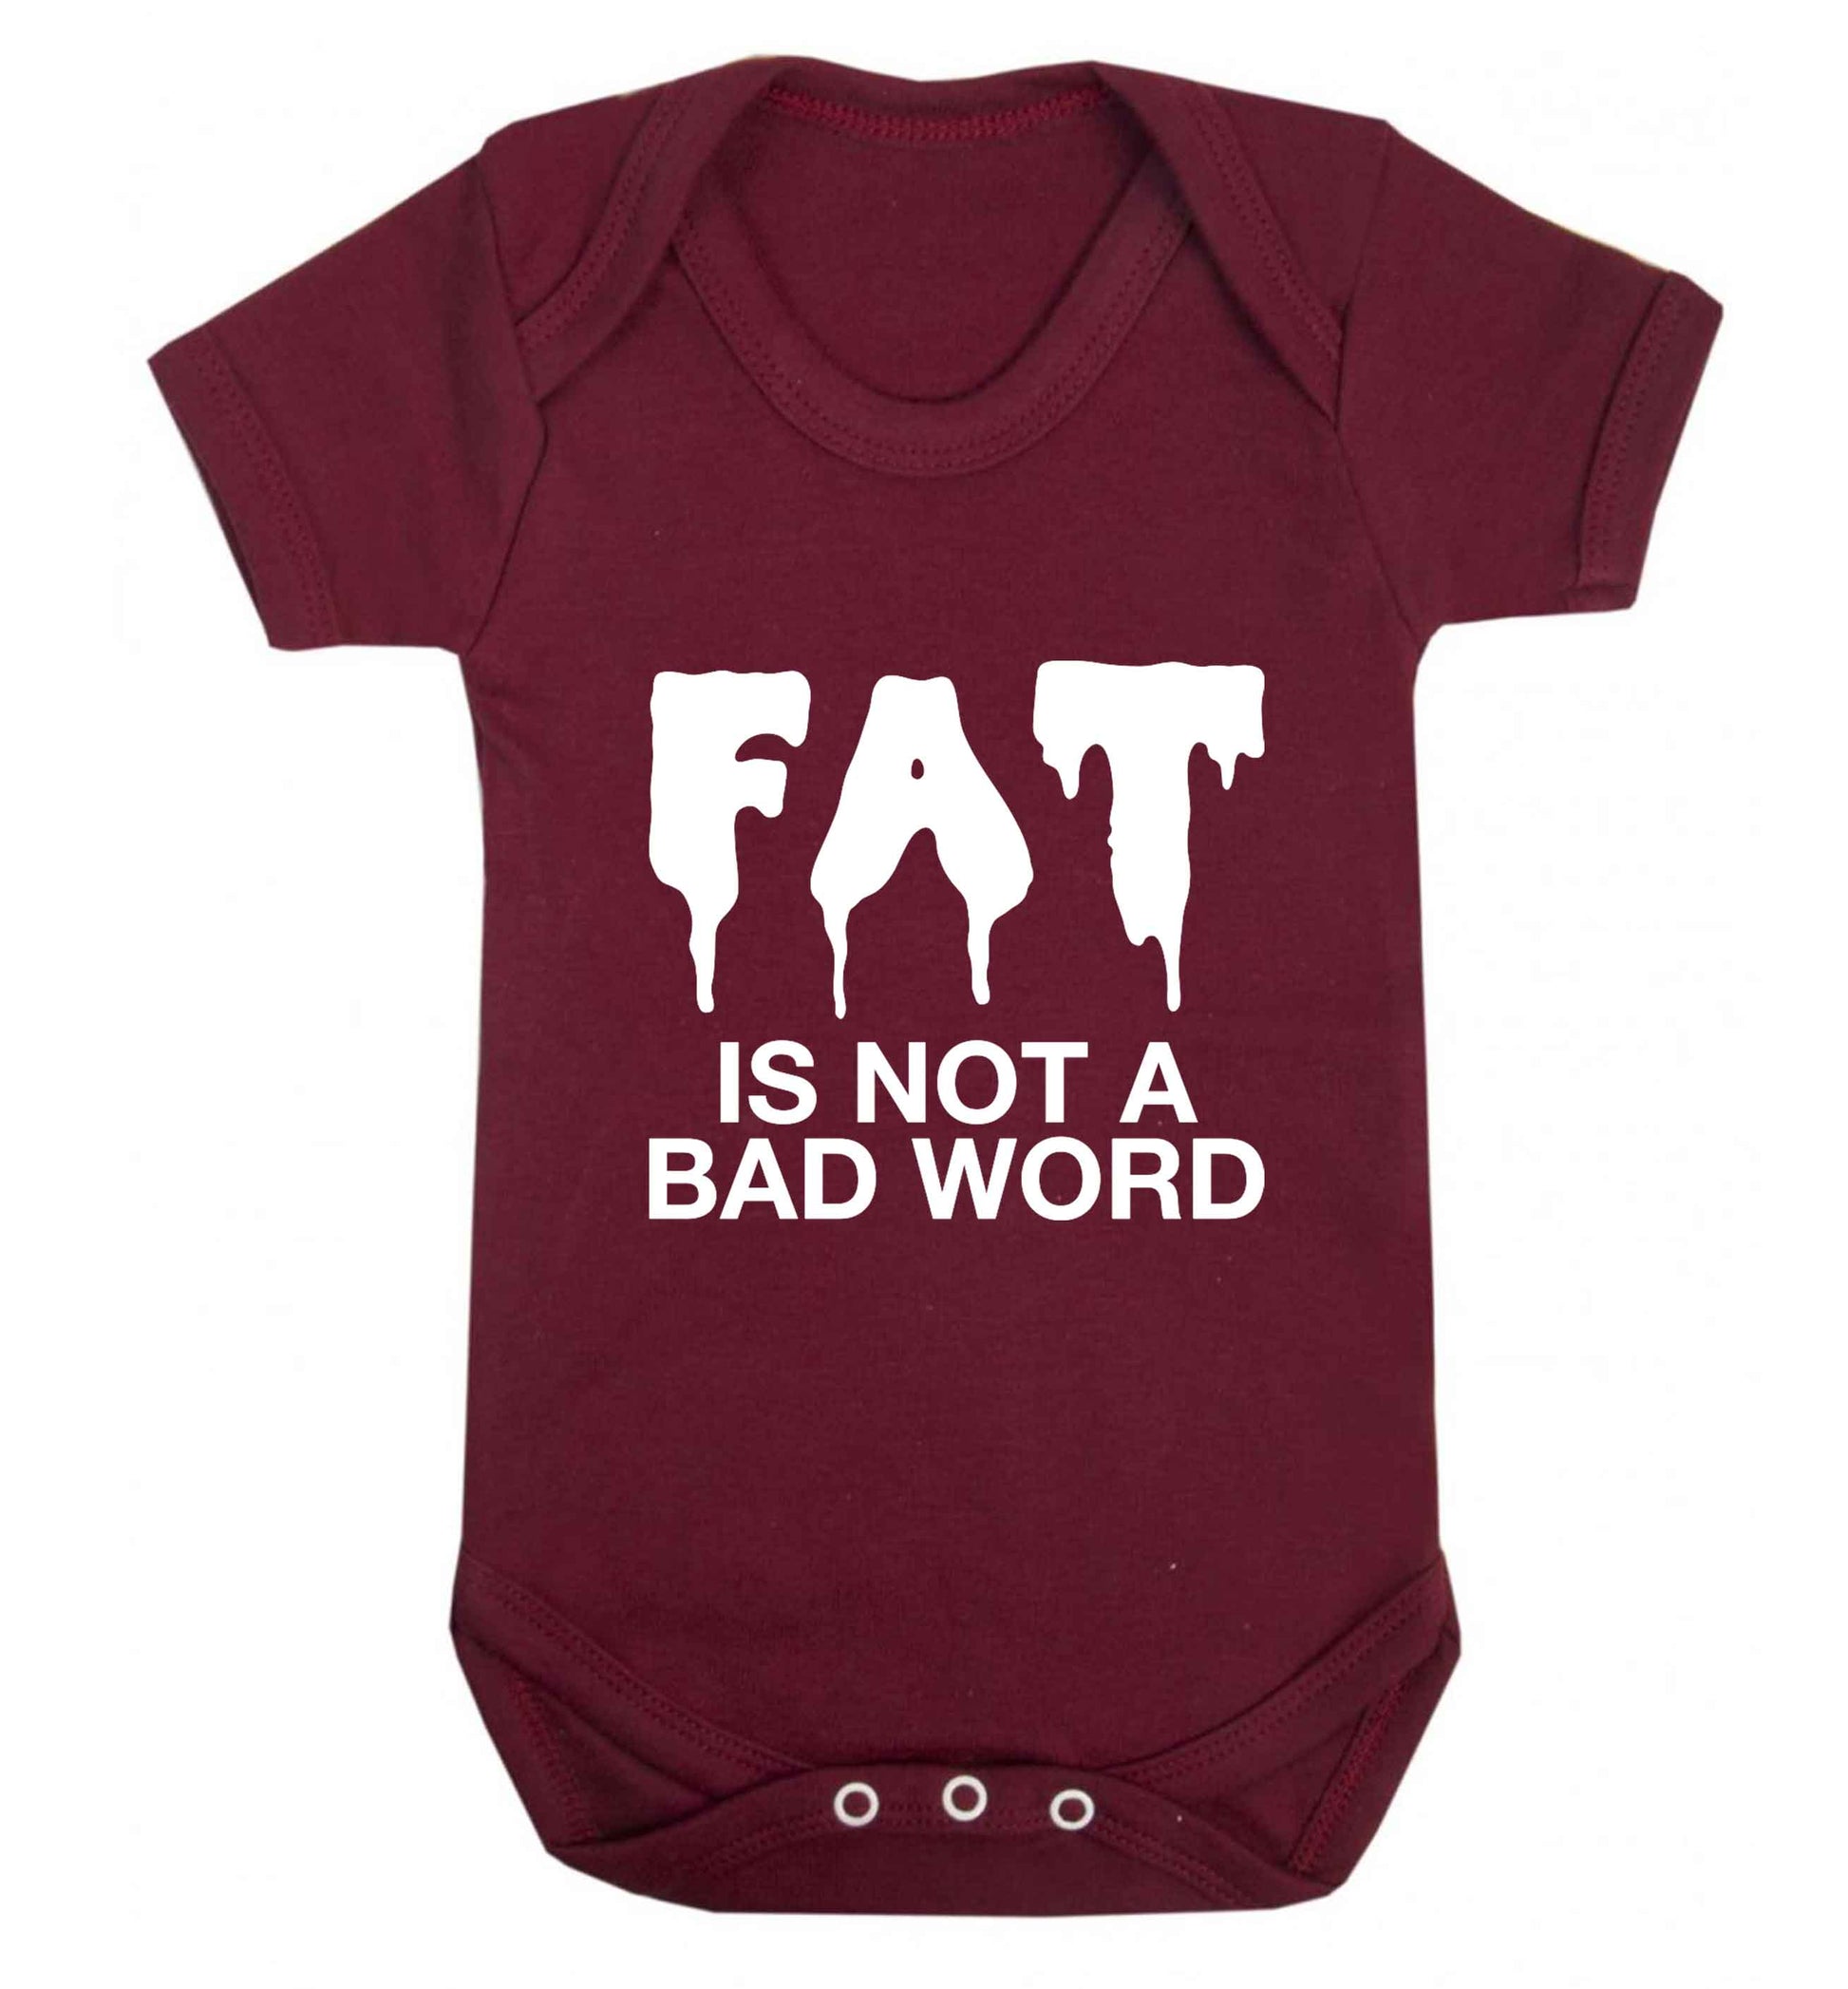 Fat is not a bad word baby vest maroon 18-24 months